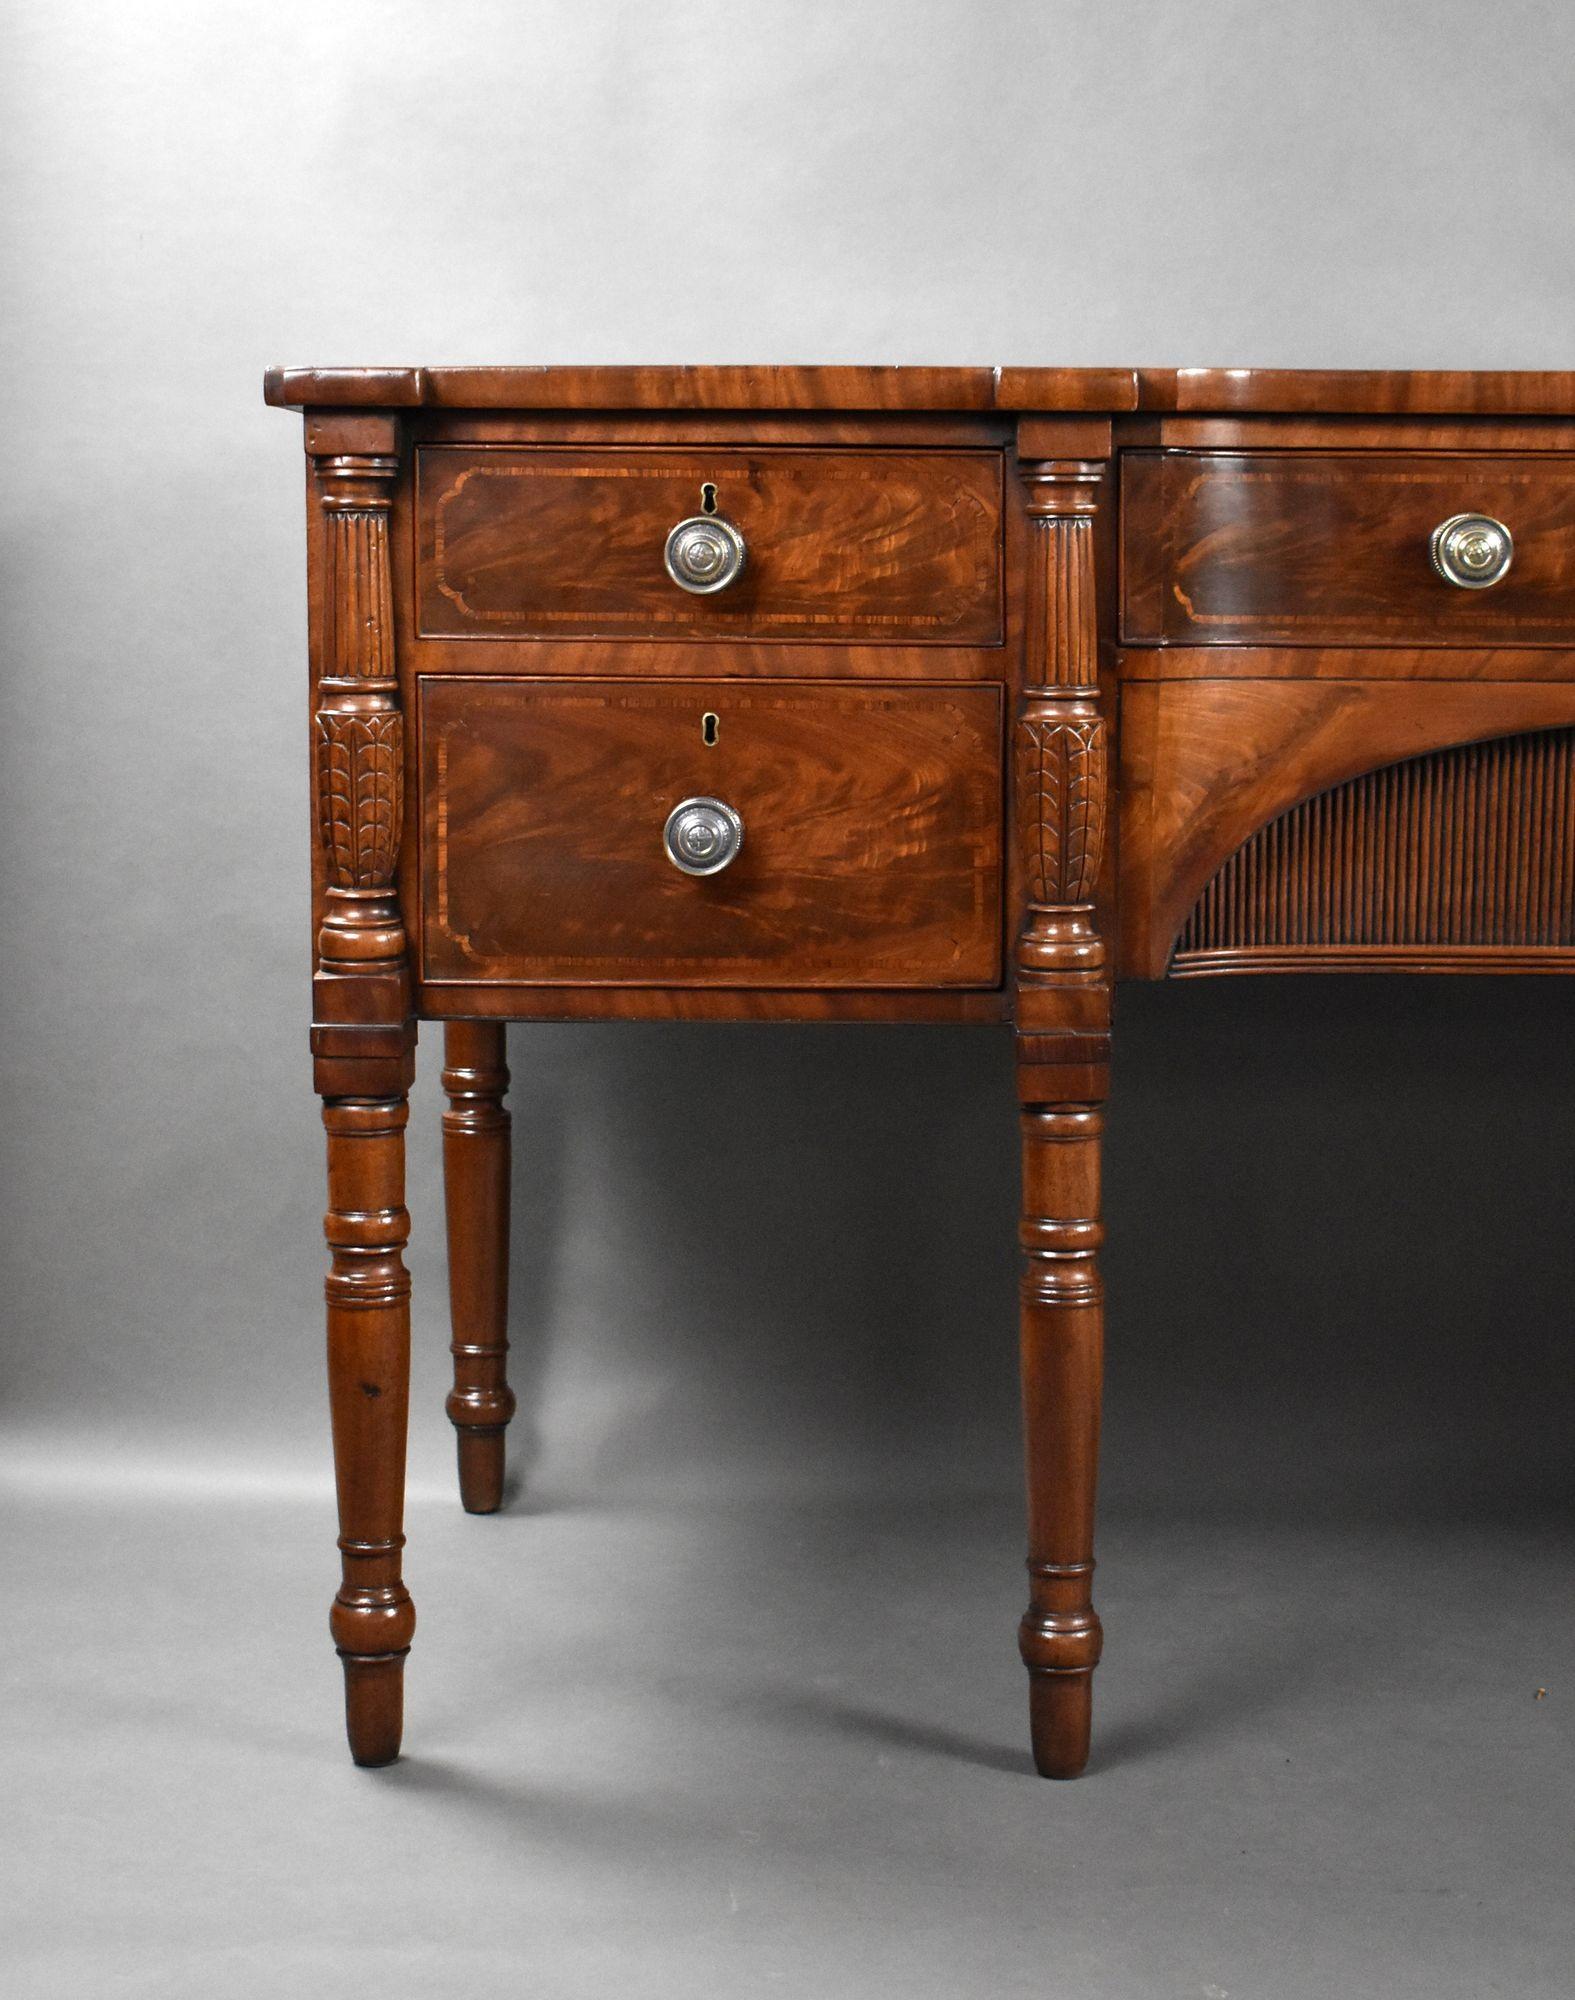 For sale is a good quality Regency flame mahogany sideboard, having an arrangement of four drawers, each with brass handles, the sideboard stands on elegantly turned legs and is in excellent condition for its age. This piece was once situated in